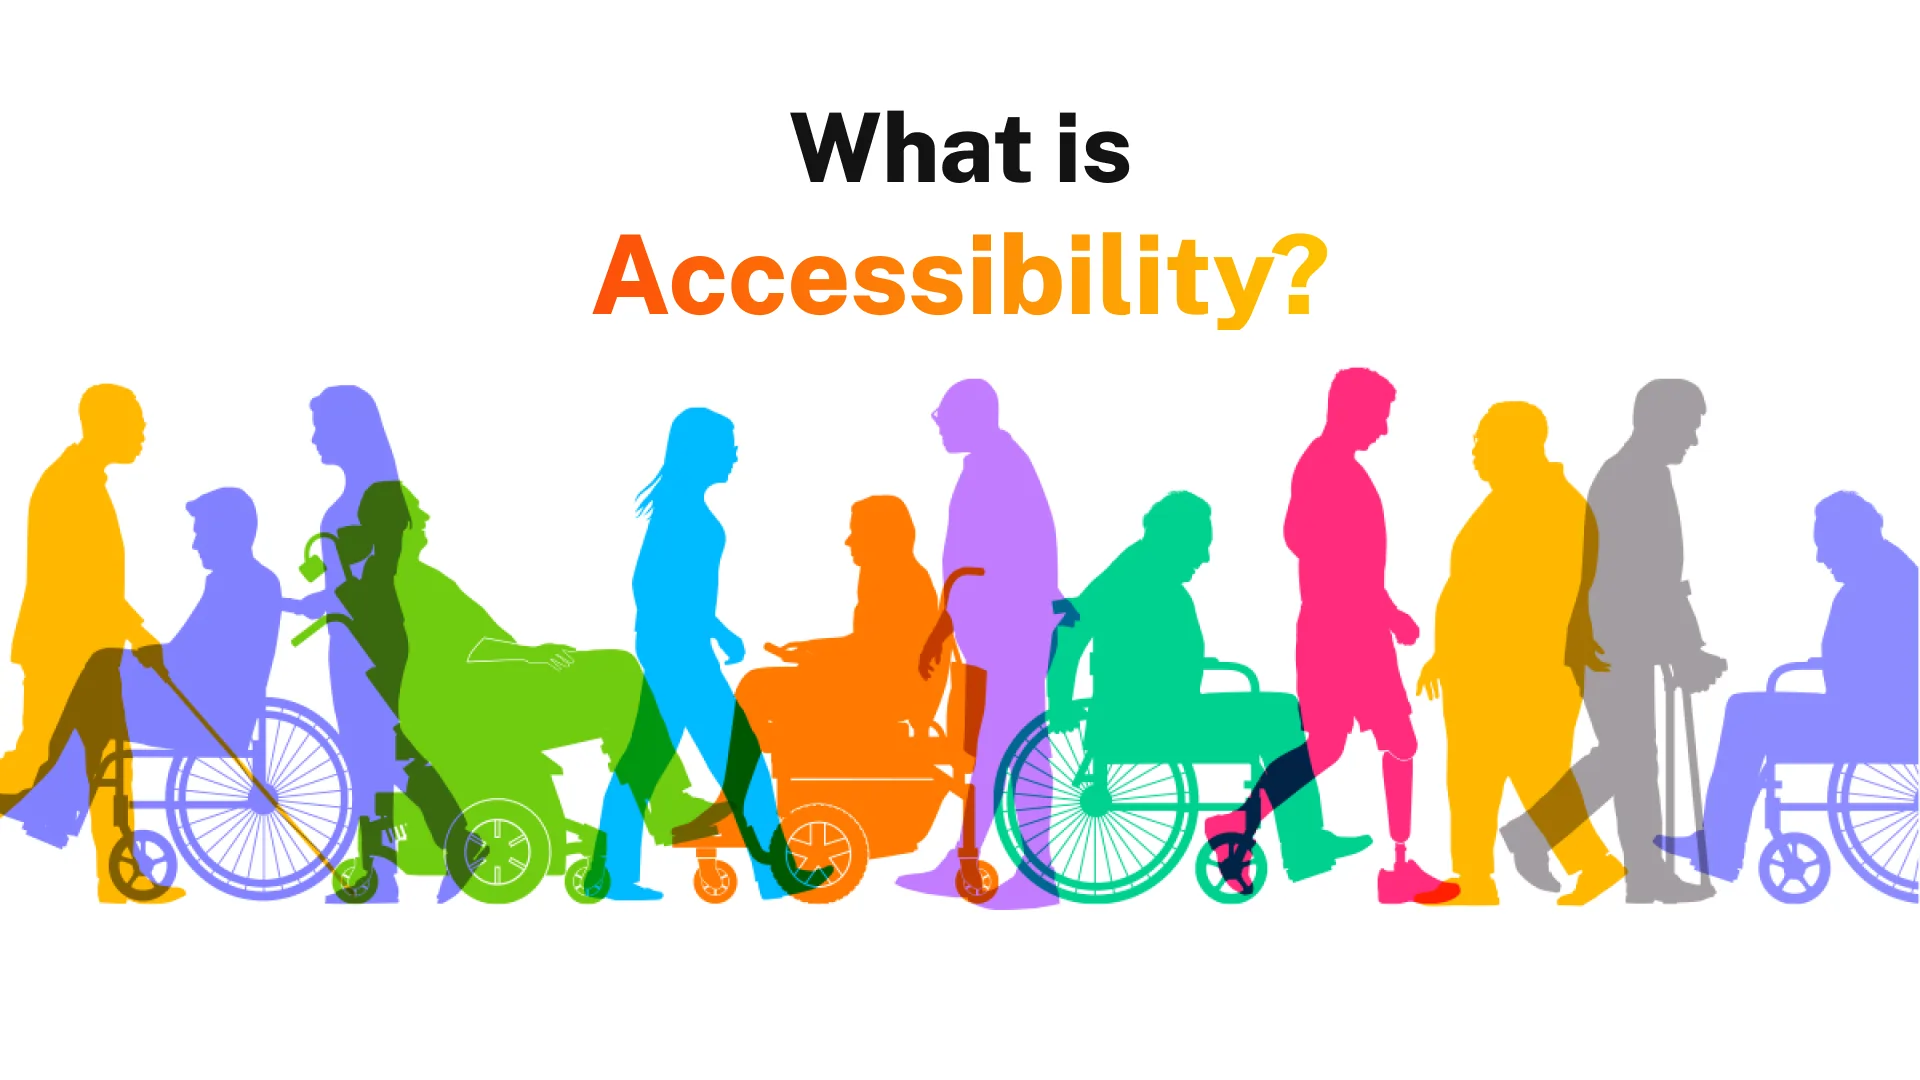 What is Accessibility? Why we should compliant with Accessibility policy?